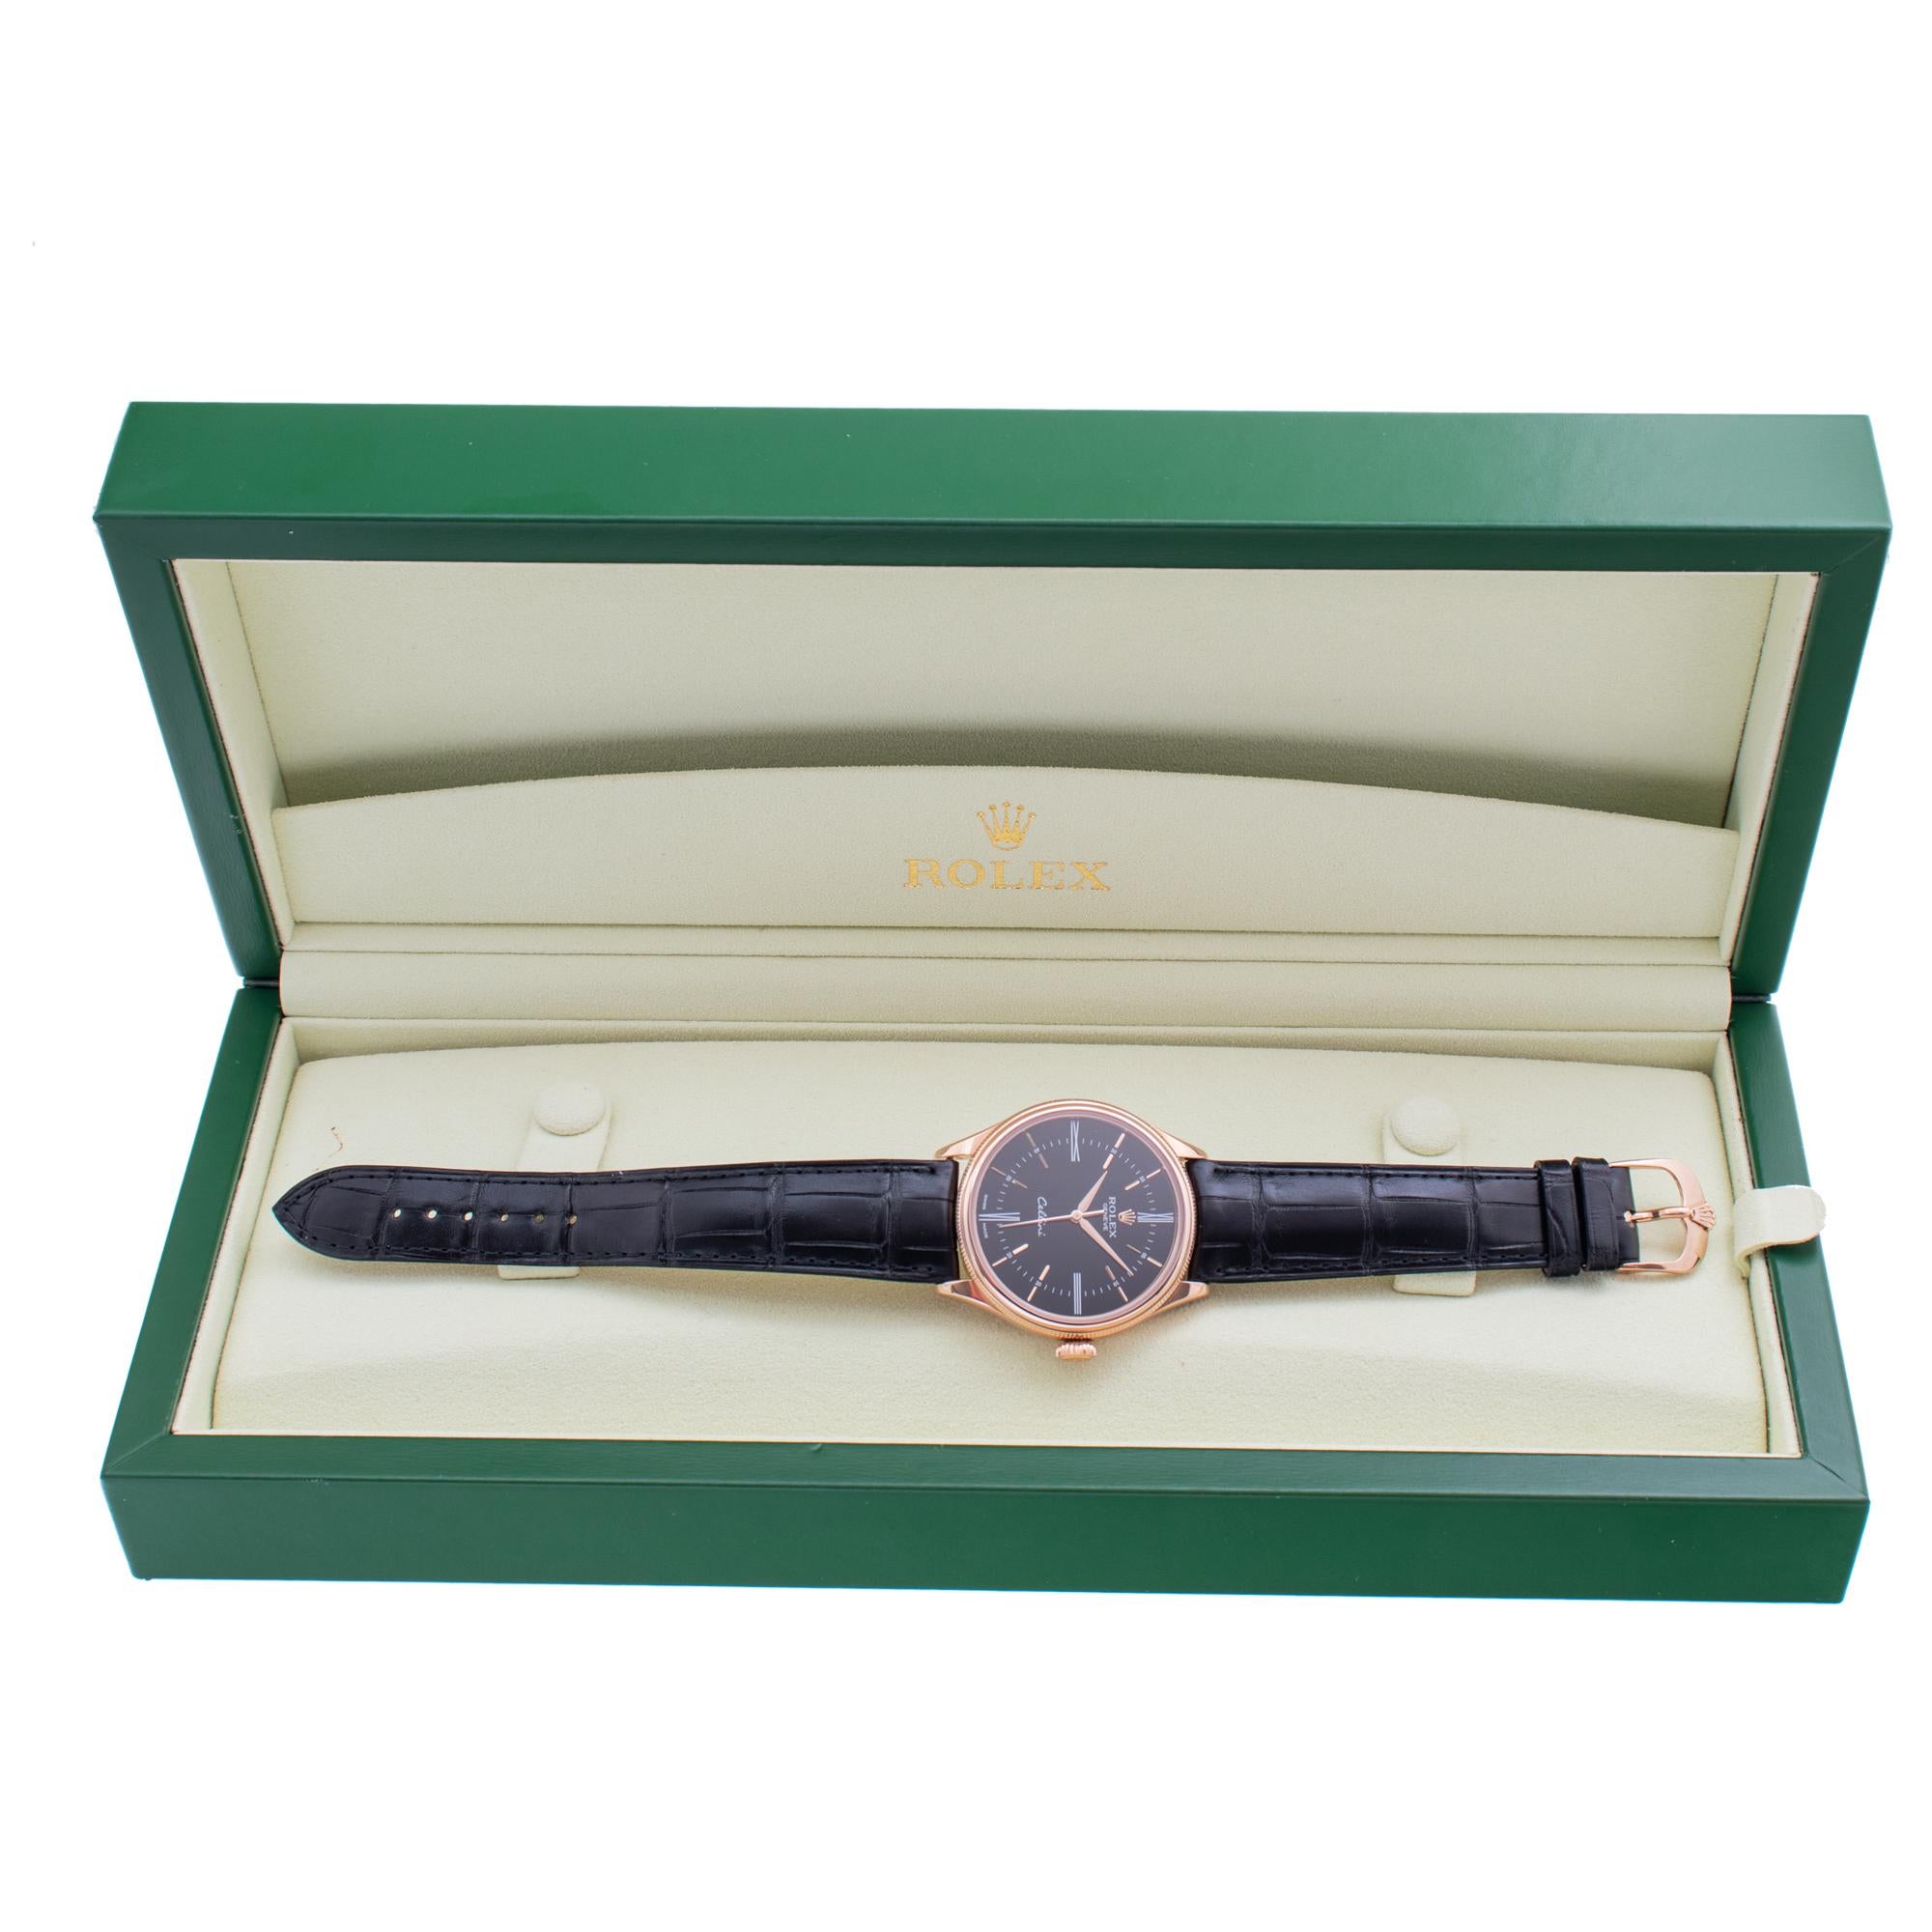 Rolex Cellini in Everose 18k gold on leather strap. Auto w/ sweep seconds. 39 mm case size. Complete with box and papers. **Bank wire only at this price** Ref 50505. Fine Pre-owned Rolex Watch.

Certified preowned Classic Rolex Cellini 50505 watch